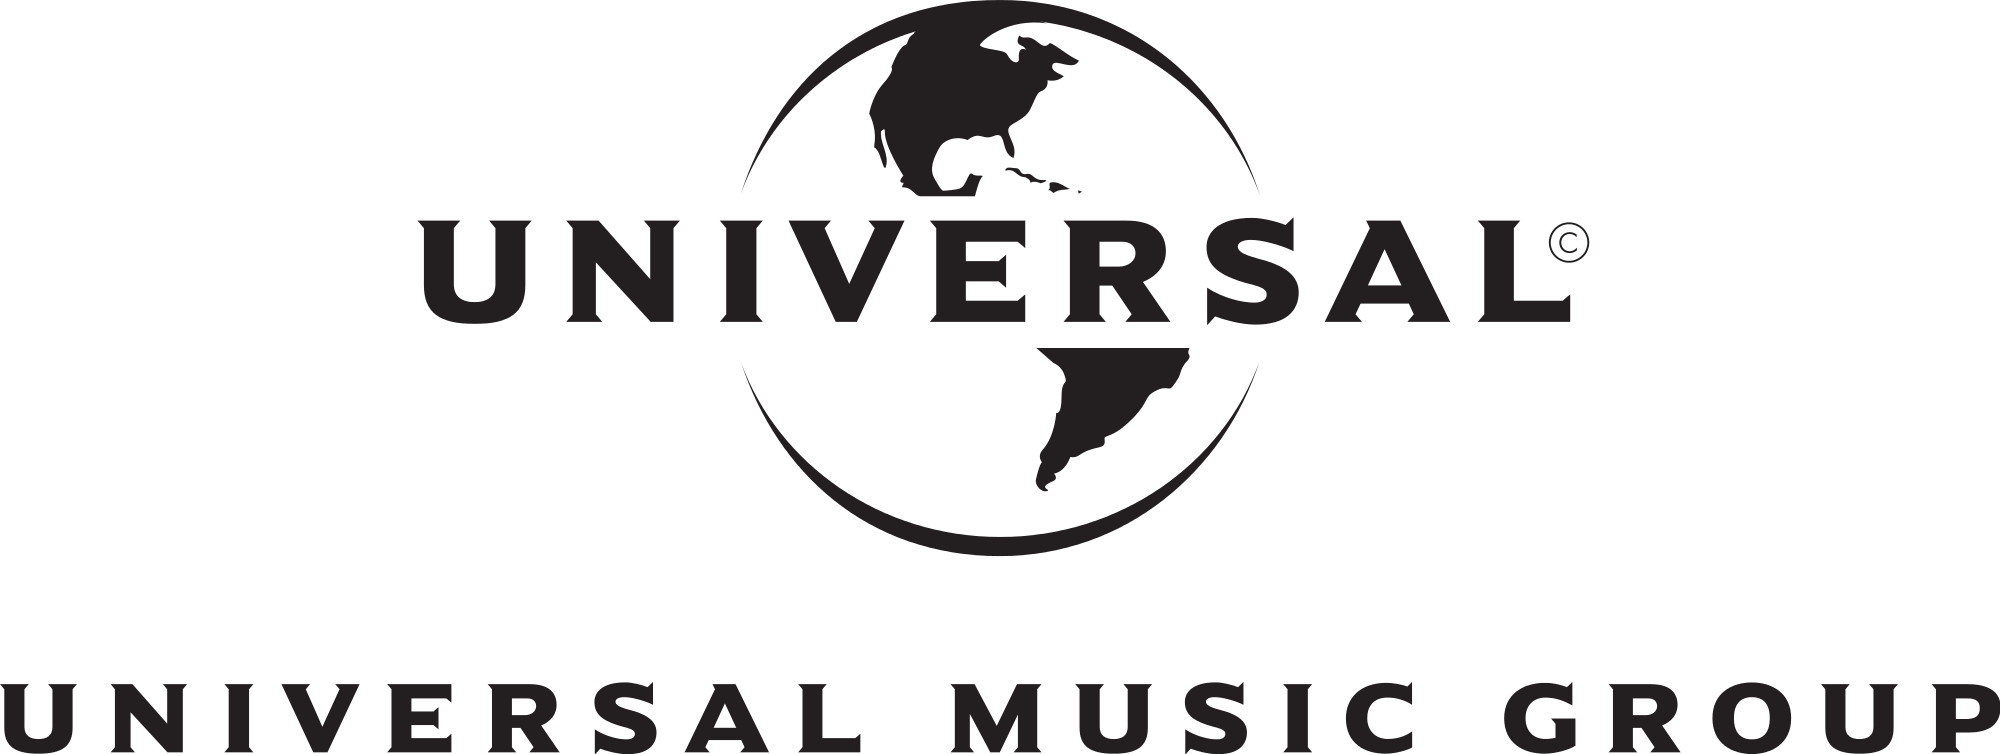 Universal Music sets record revenue figures in 2016